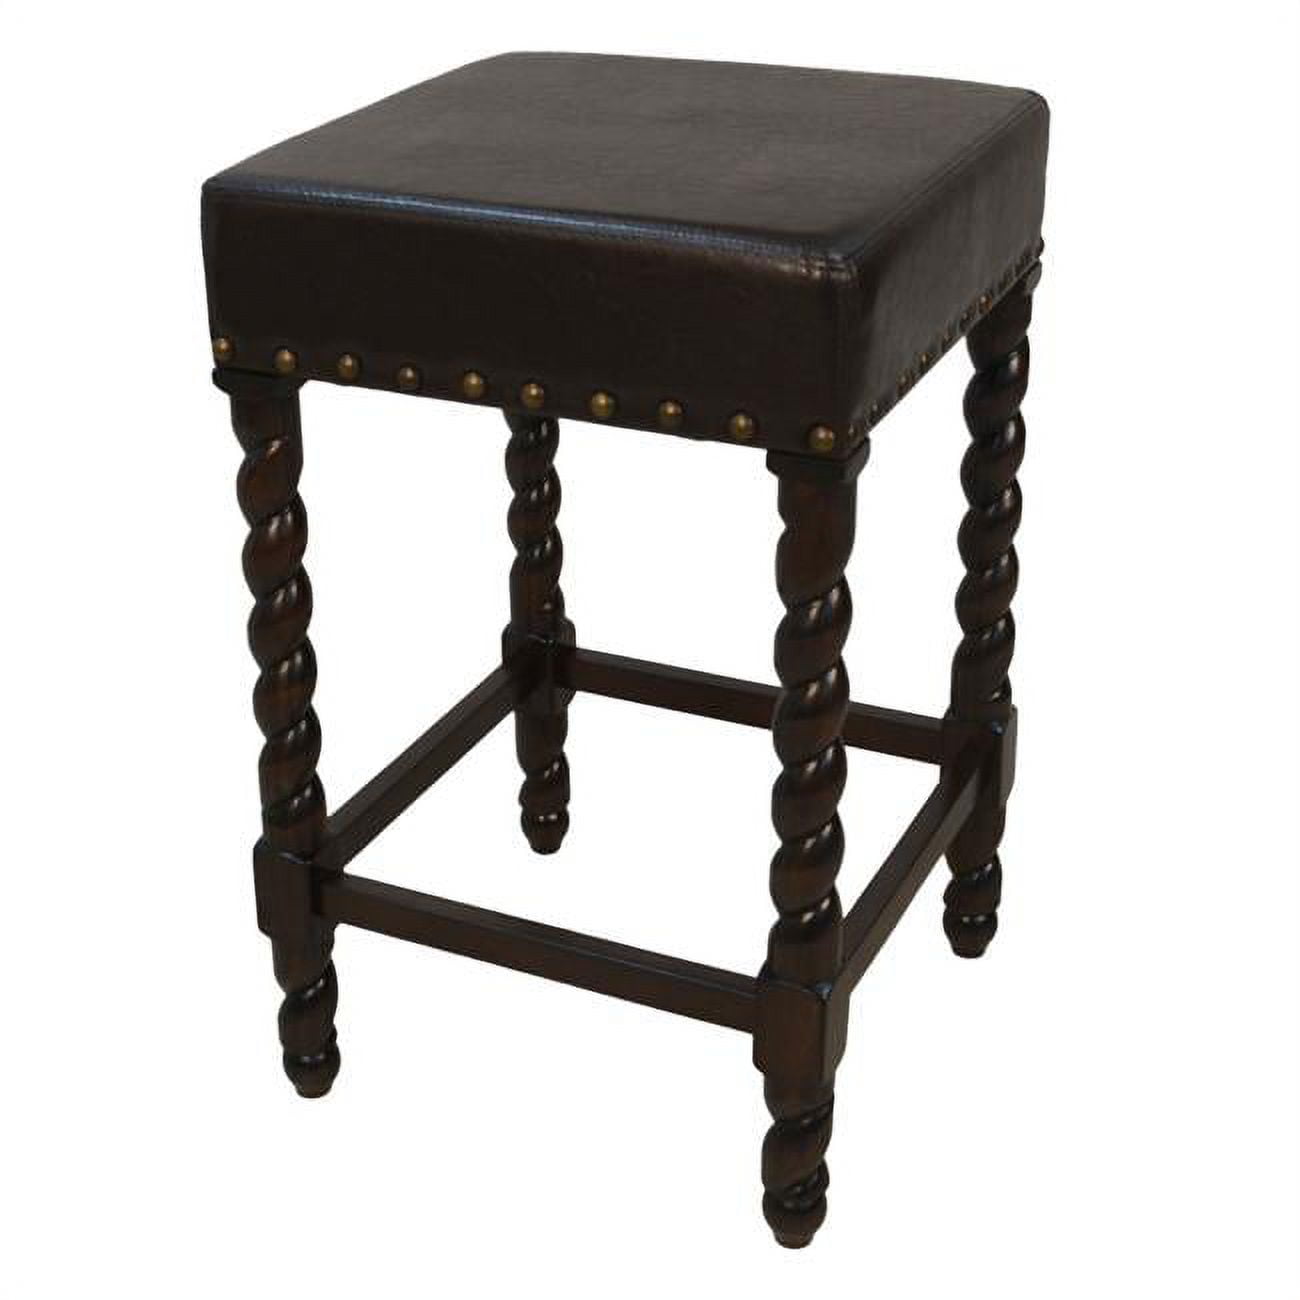 3663-espbr 24 In. Remick Counter Stool, Espresso & Brown Leatherette